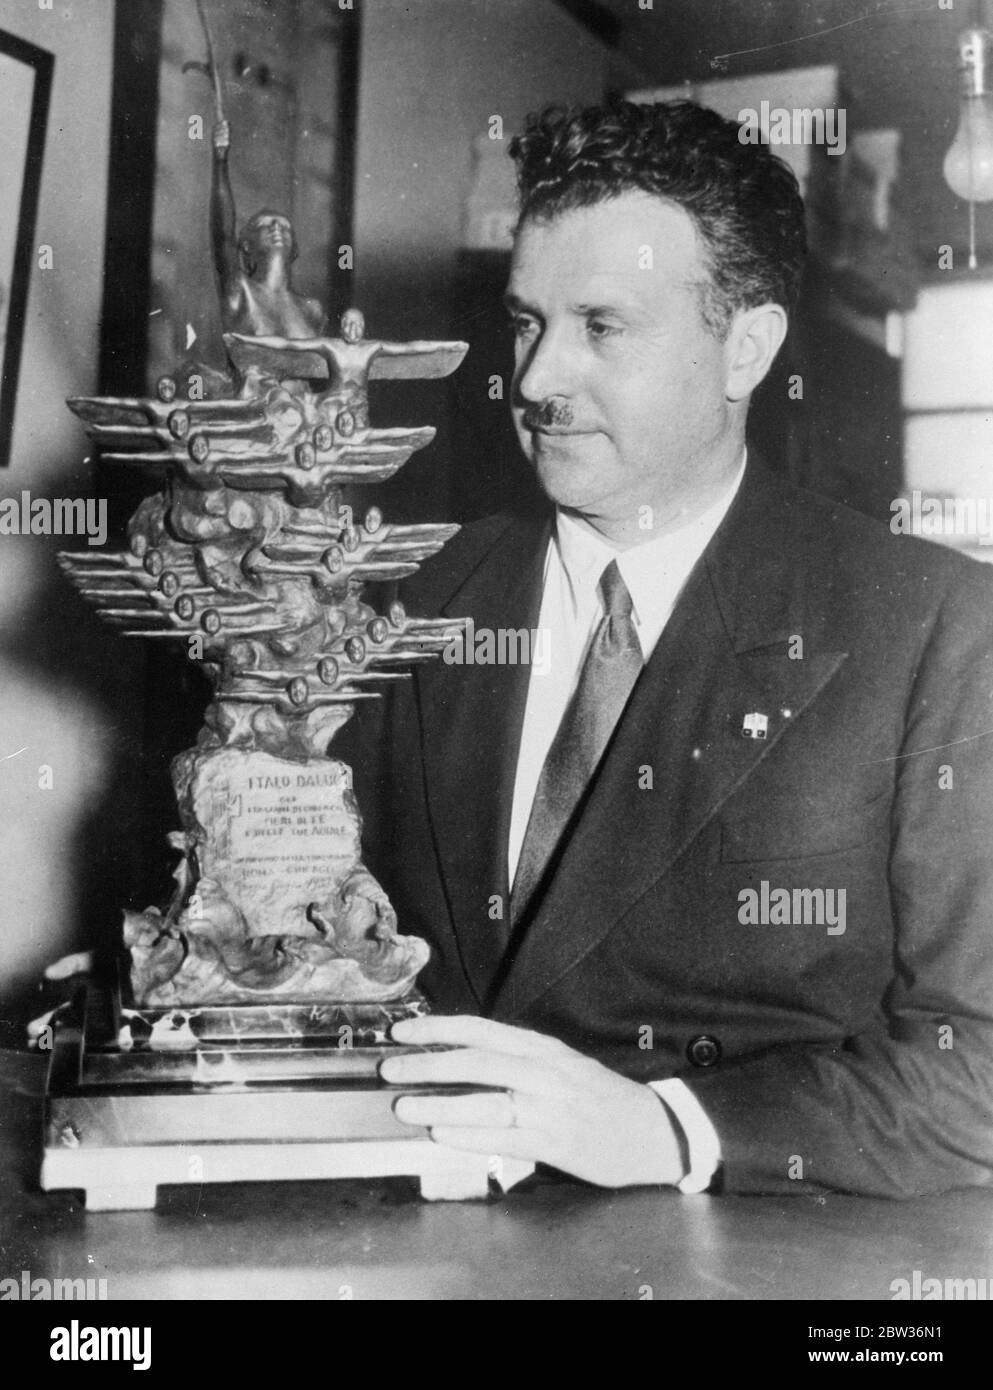 Chicago Italians trophy for General Balbo after leading trans Atlantic flight . Italians resident in Chicago are to present a silver trophy to General Balbo , the Italian Air Minister when he arrives with the fleet of 24 Savoia - Marchetti SM.55X trans - Atlantic seaplanes after the greatest formation flight ever attempted . Photo shows ; Dr Guiseppe Castruccio , the Italian Consul in Chicago , with the trophy which the Italians in the city are to present to General Balbo . 30 June 1933 Stock Photo